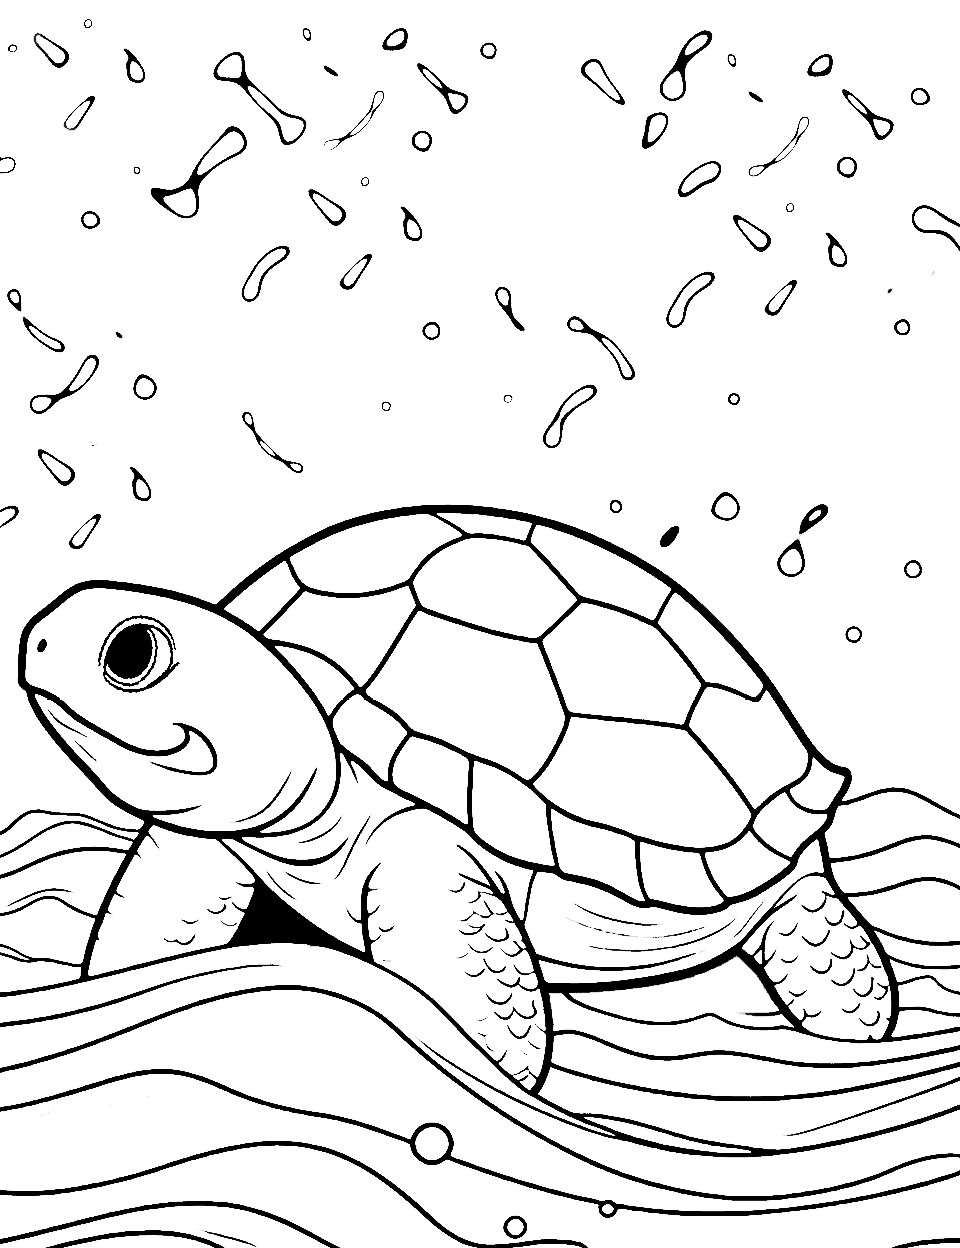 Rainy Turtle Experience Coloring Page - A turtle witnessing rain for the first time after surfacing from the water.